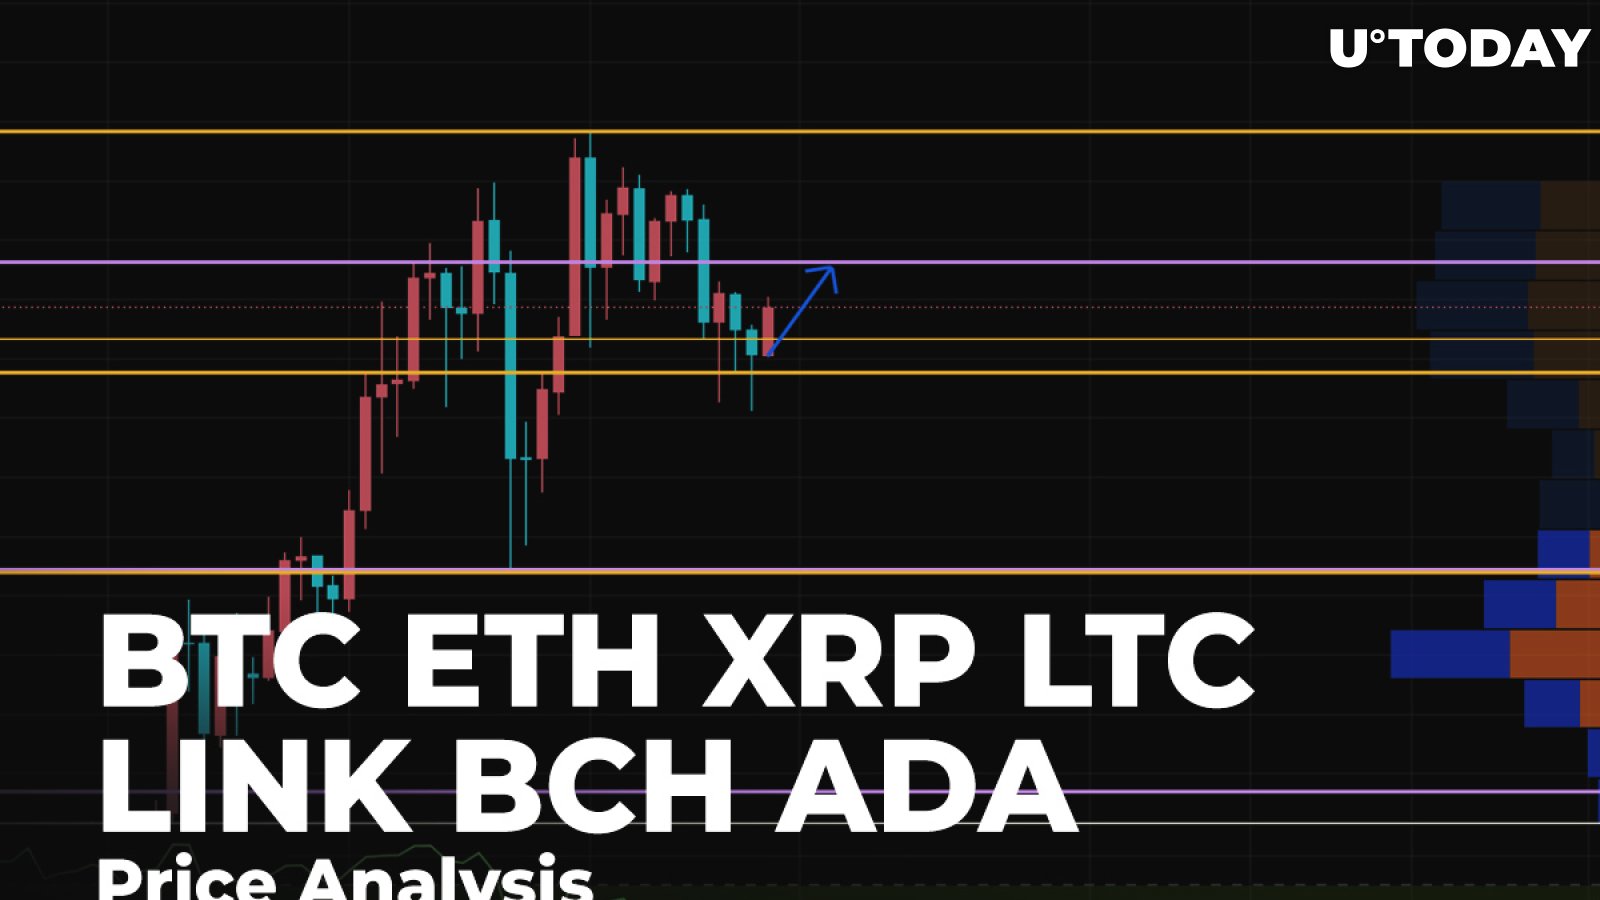 BTC, ETH, XRP, LTC, LINK, BCH and ADA Price Analysis for December 13